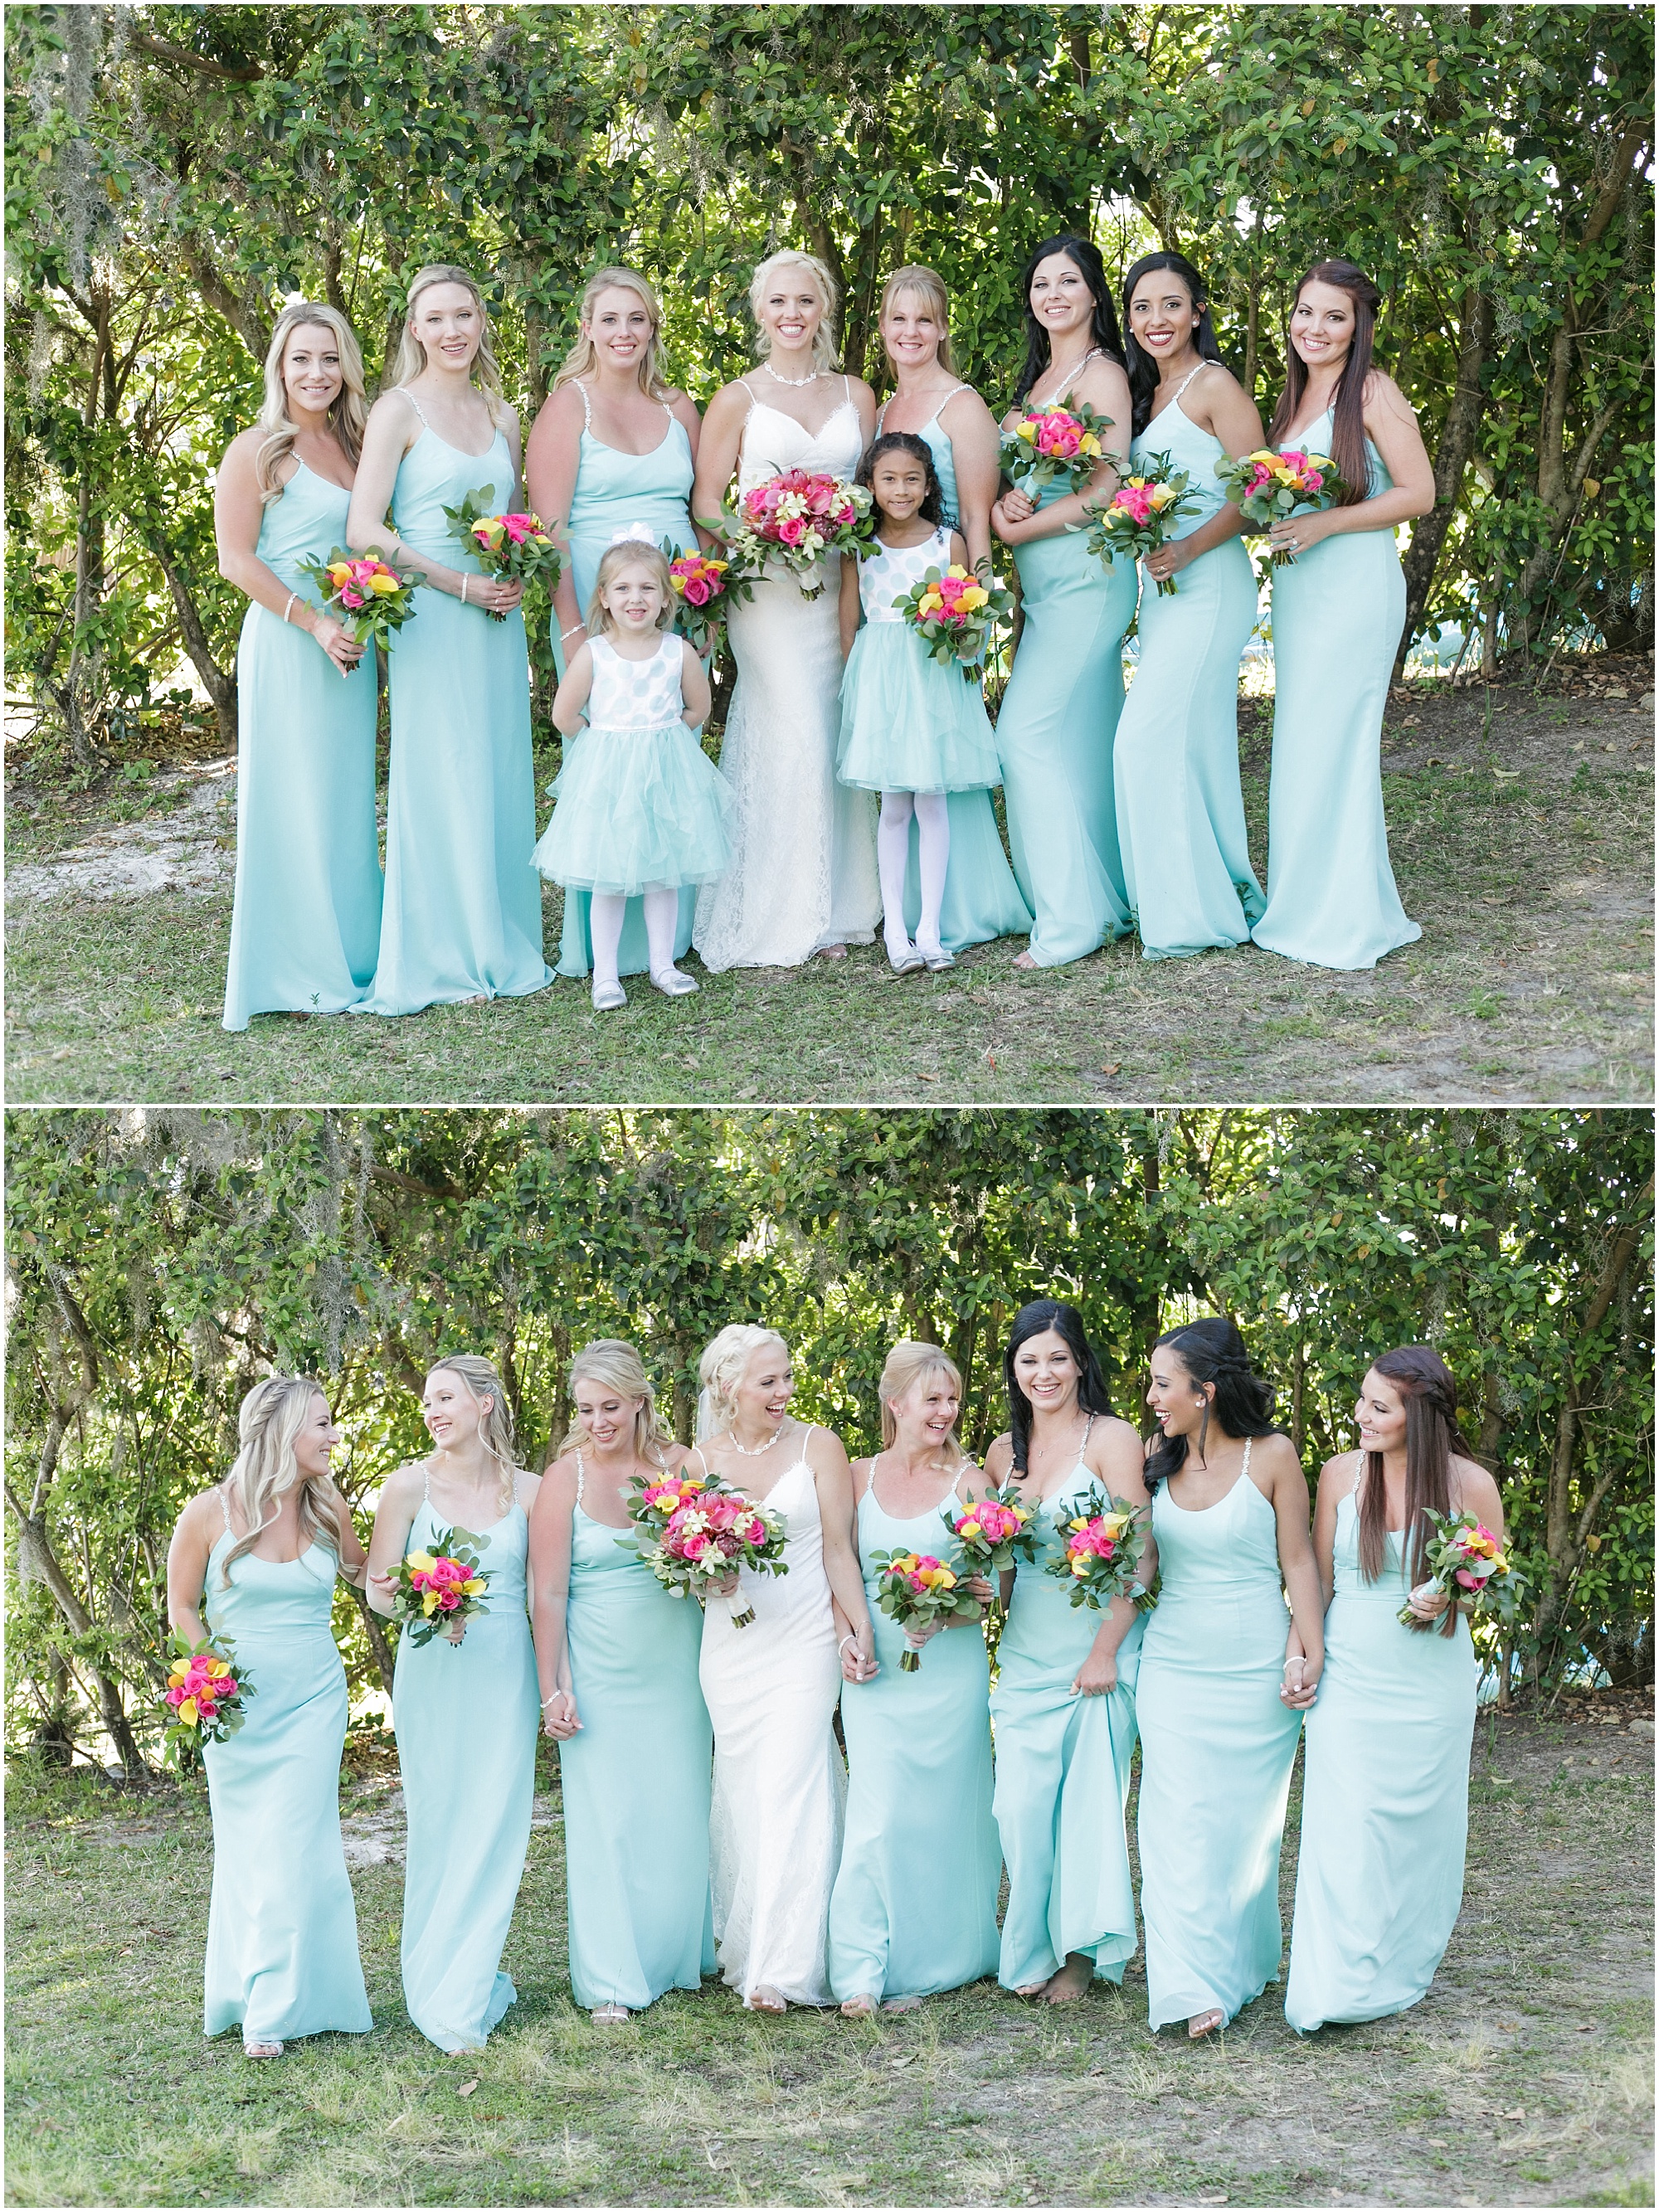 Paradise bridal party in teal dresses posing for photos.